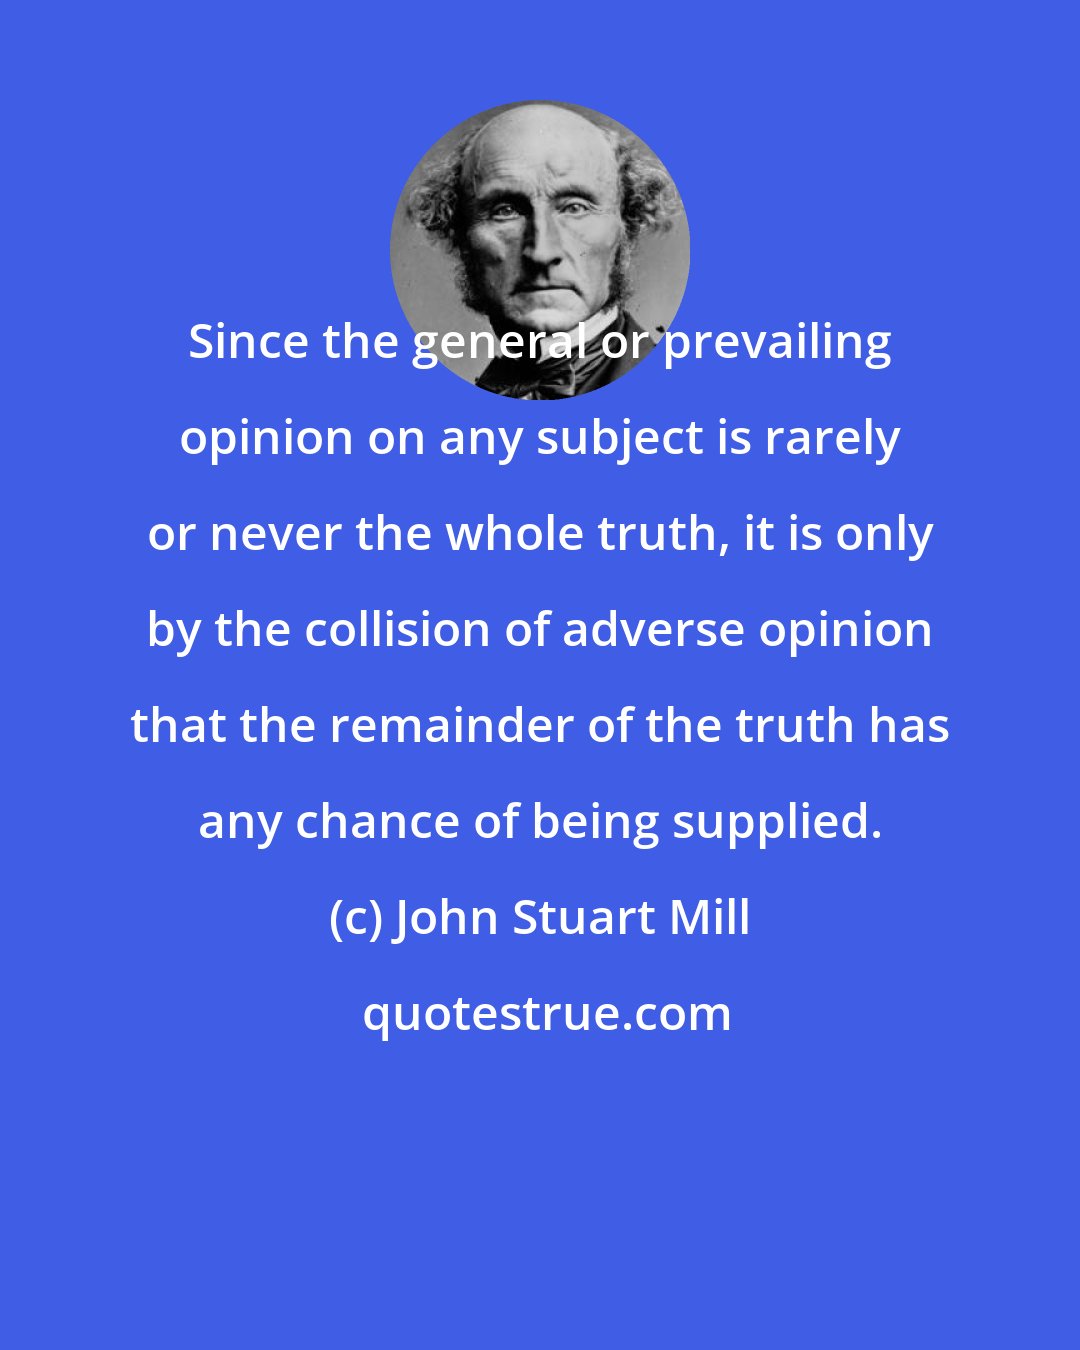 John Stuart Mill: Since the general or prevailing opinion on any subject is rarely or never the whole truth, it is only by the collision of adverse opinion that the remainder of the truth has any chance of being supplied.